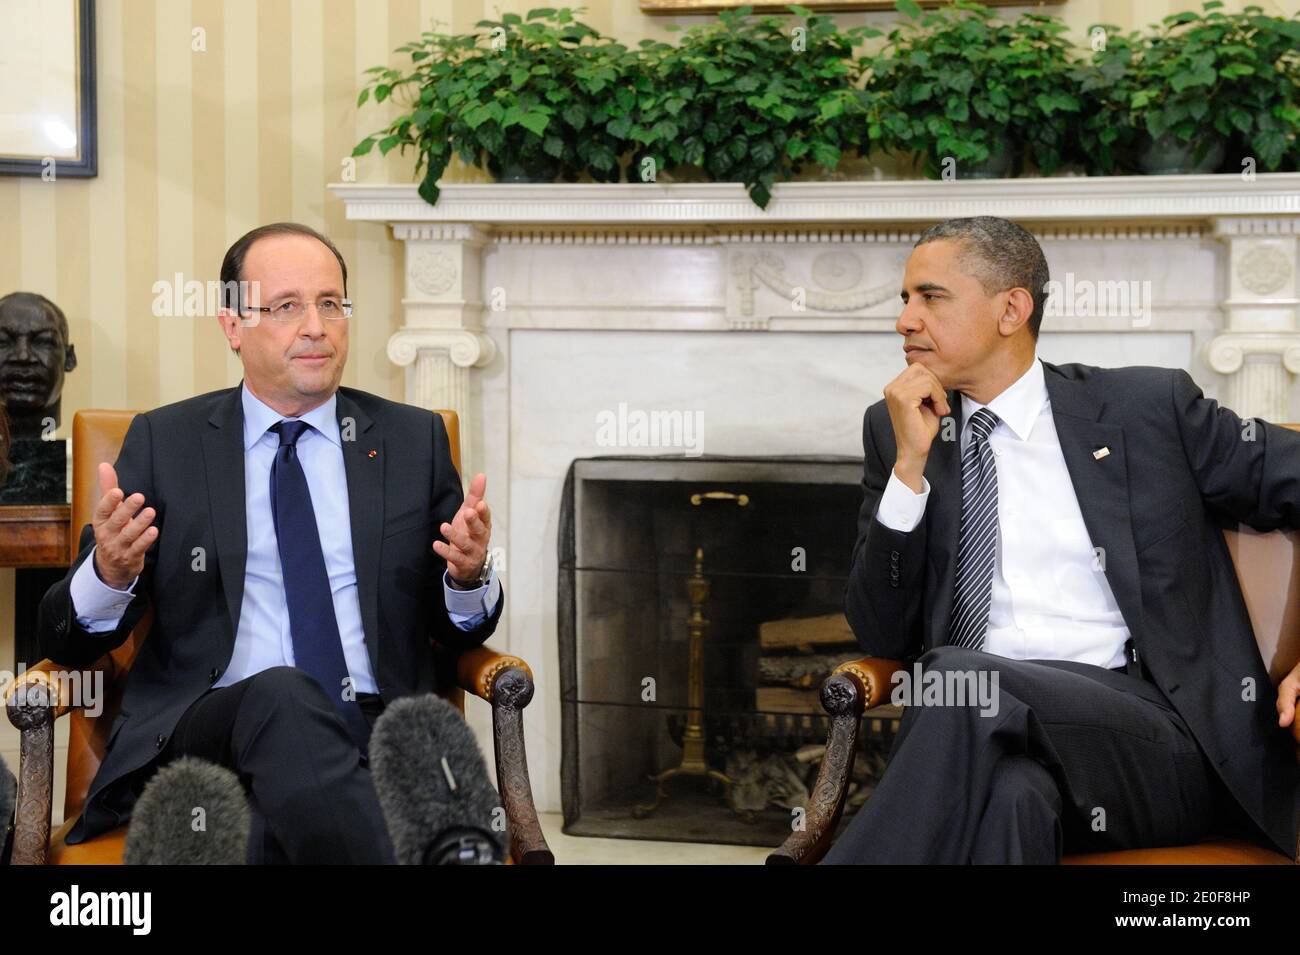 US President Barack Obama holds a bilateral meeting with French President Francois Hollande in advance of the G-8 and NATO Summits in the Oval Office of the White House in Washington, DC, USA on May 18, 2012. The two Presidents discussed their cooperation on a range of key topics, to include the global economy and Afghanistan. Photo by Jacques Witt/Pool/ABACAPRESS.COM Stock Photo